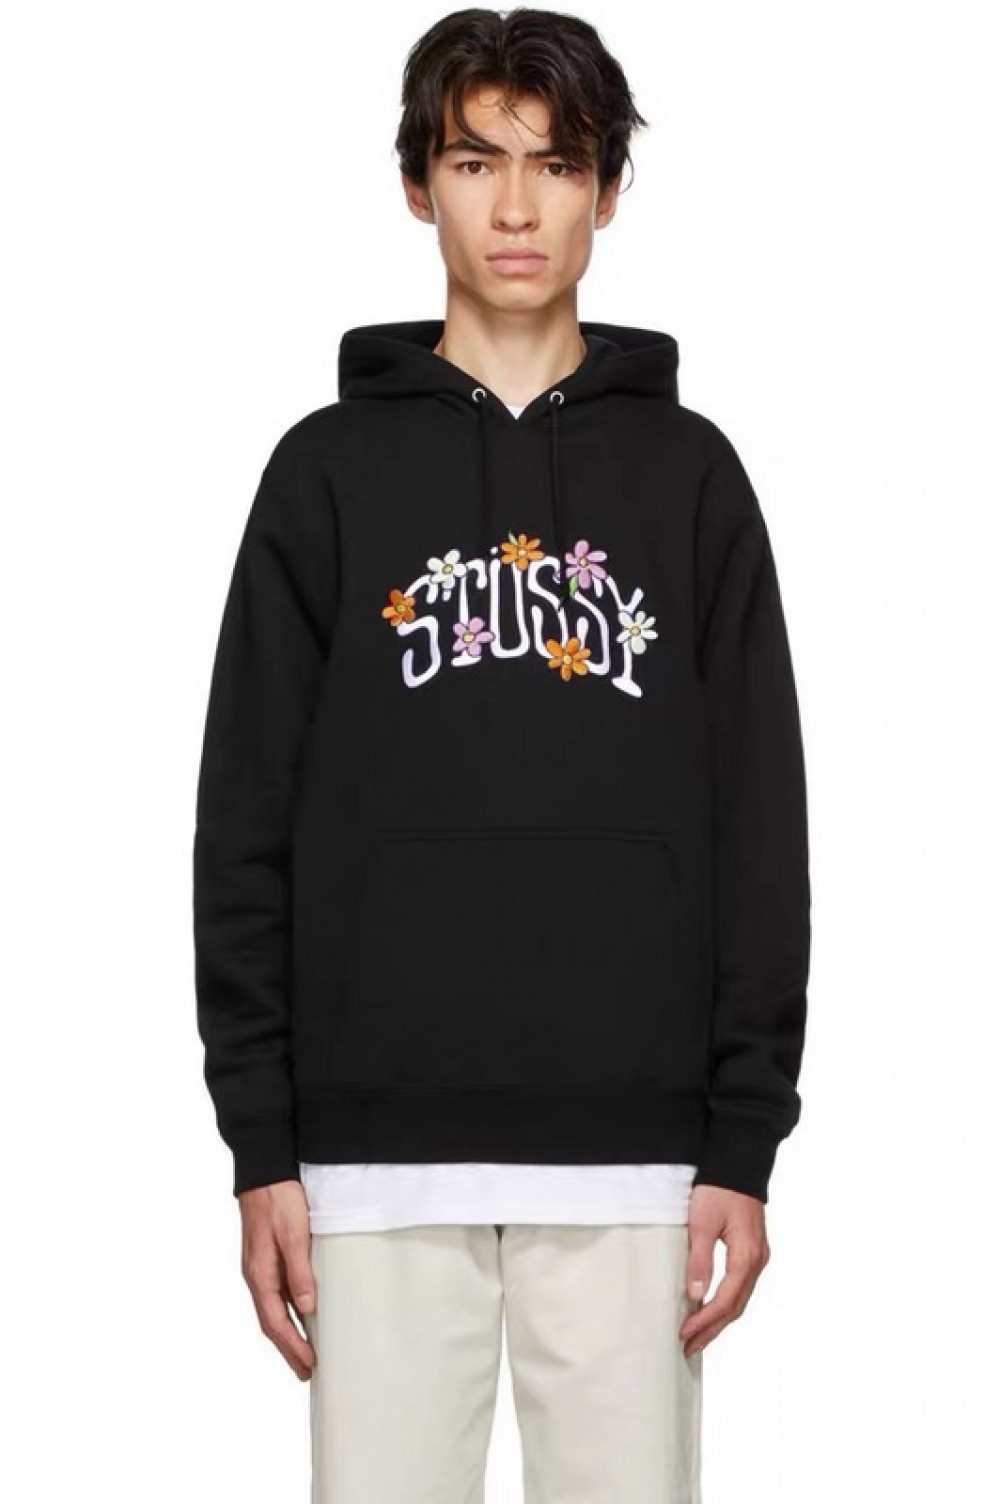 A+ Quality Stussy Collegiate Floral Applique Hoodie